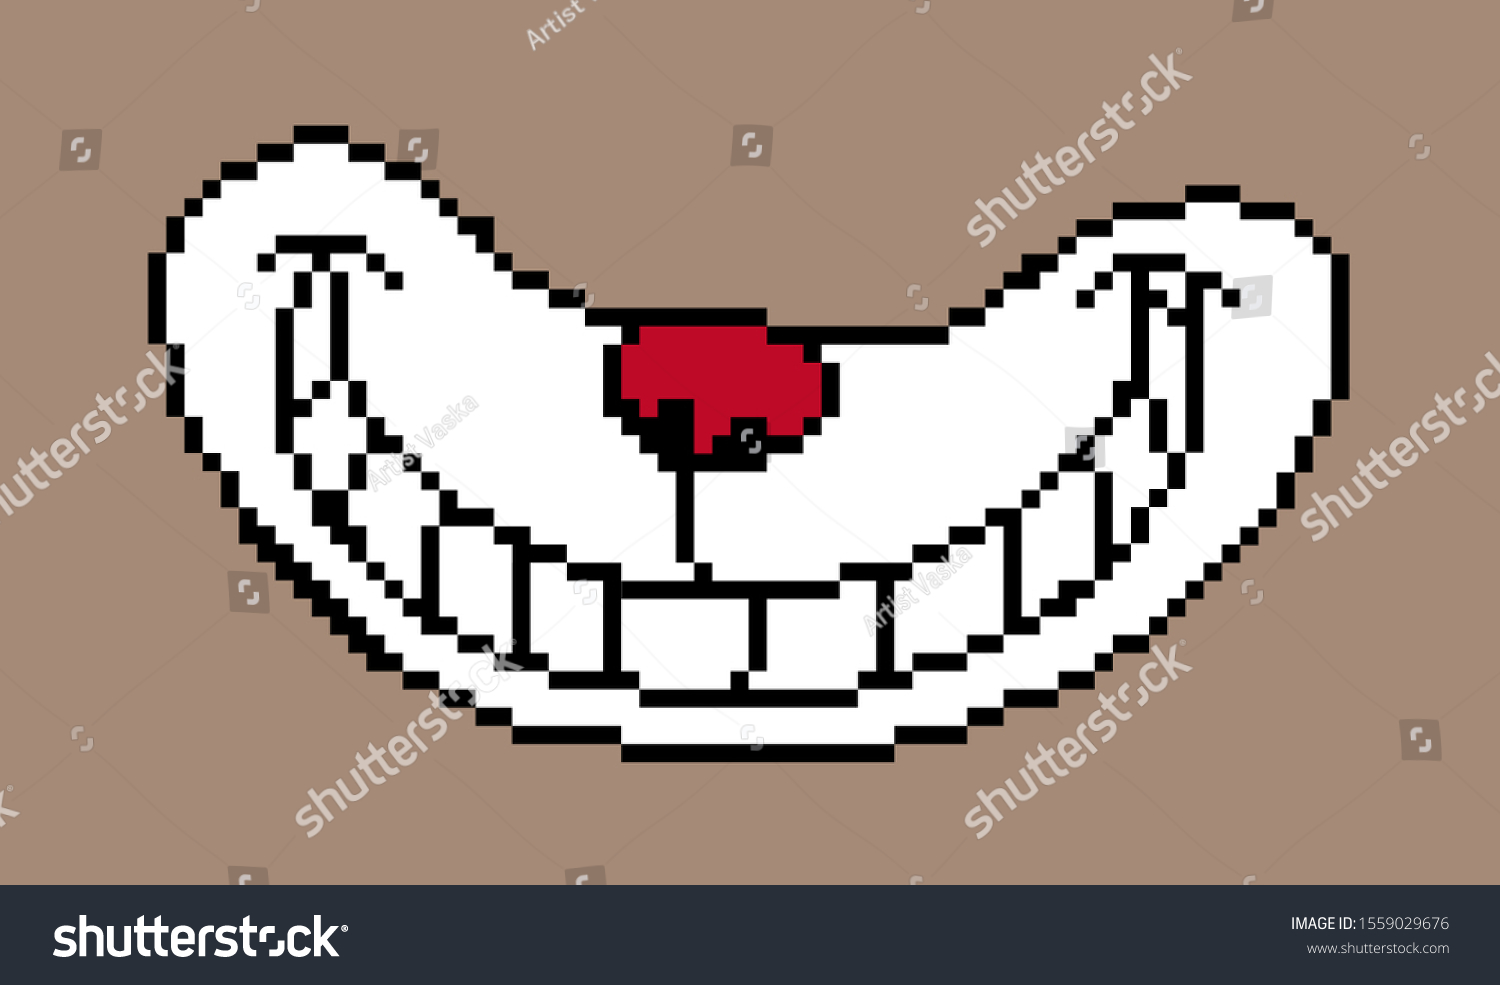 SVG of 8 bit pixelated smile of a Cheshire cat. vector illustration svg